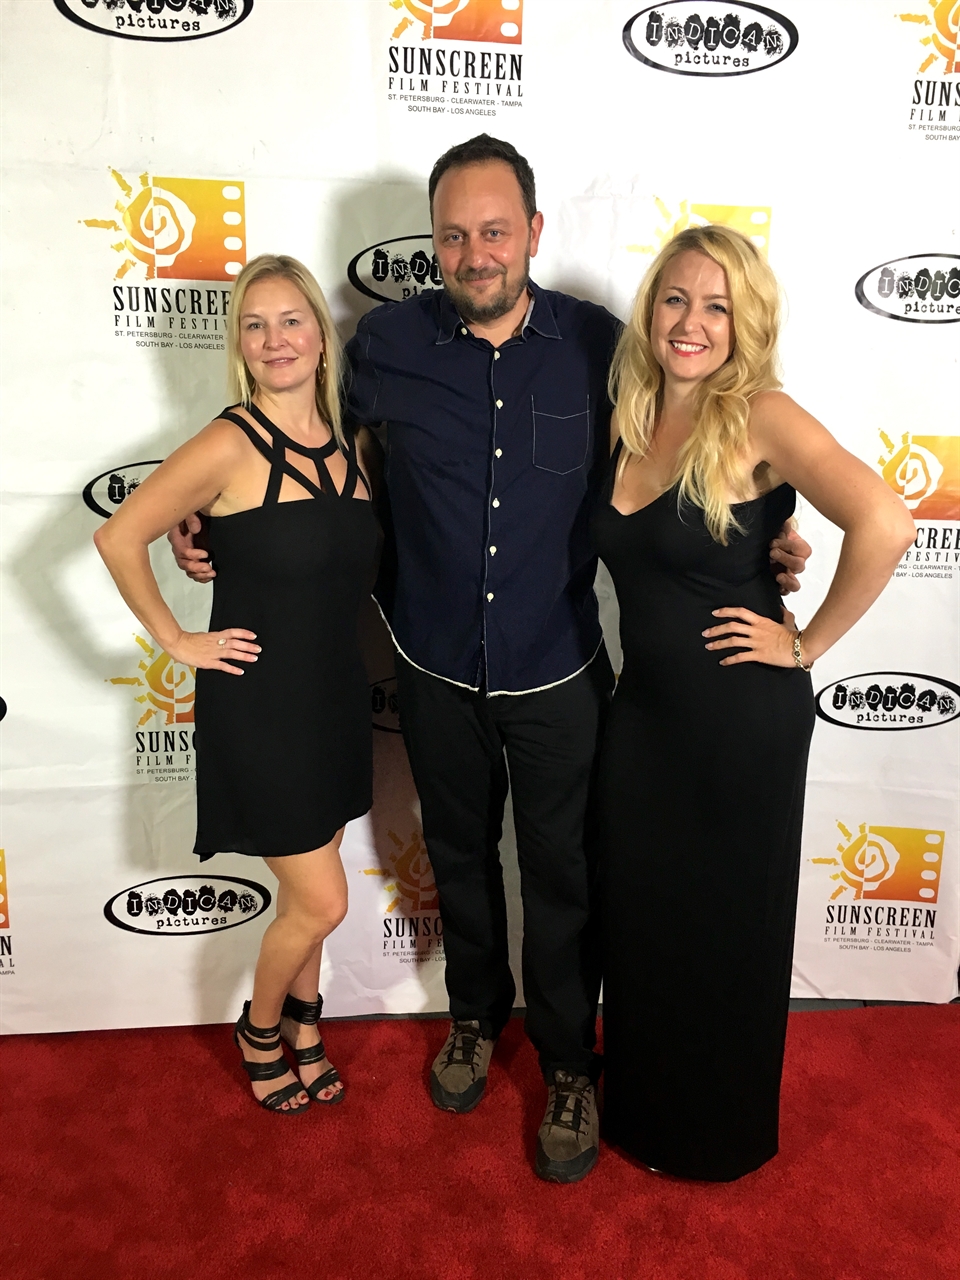 Janine with director Scott Donovan and producer/ actress Rachel Ryling at Sunscreen Film Festival